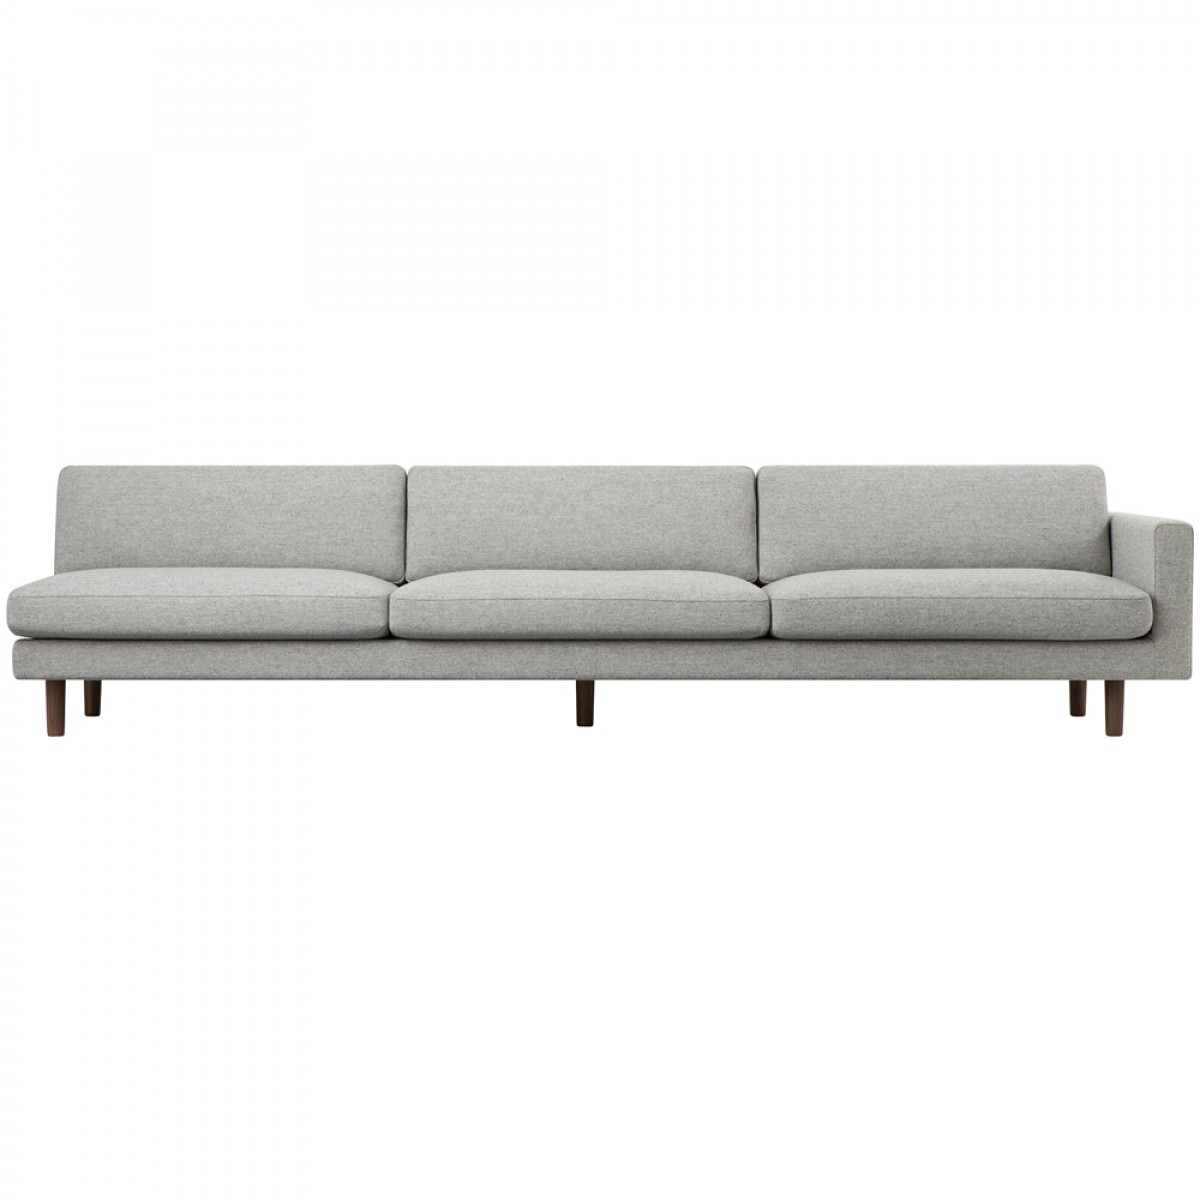 Hiroshima Wide Three Seater Sofa Right (Upholstered Version)